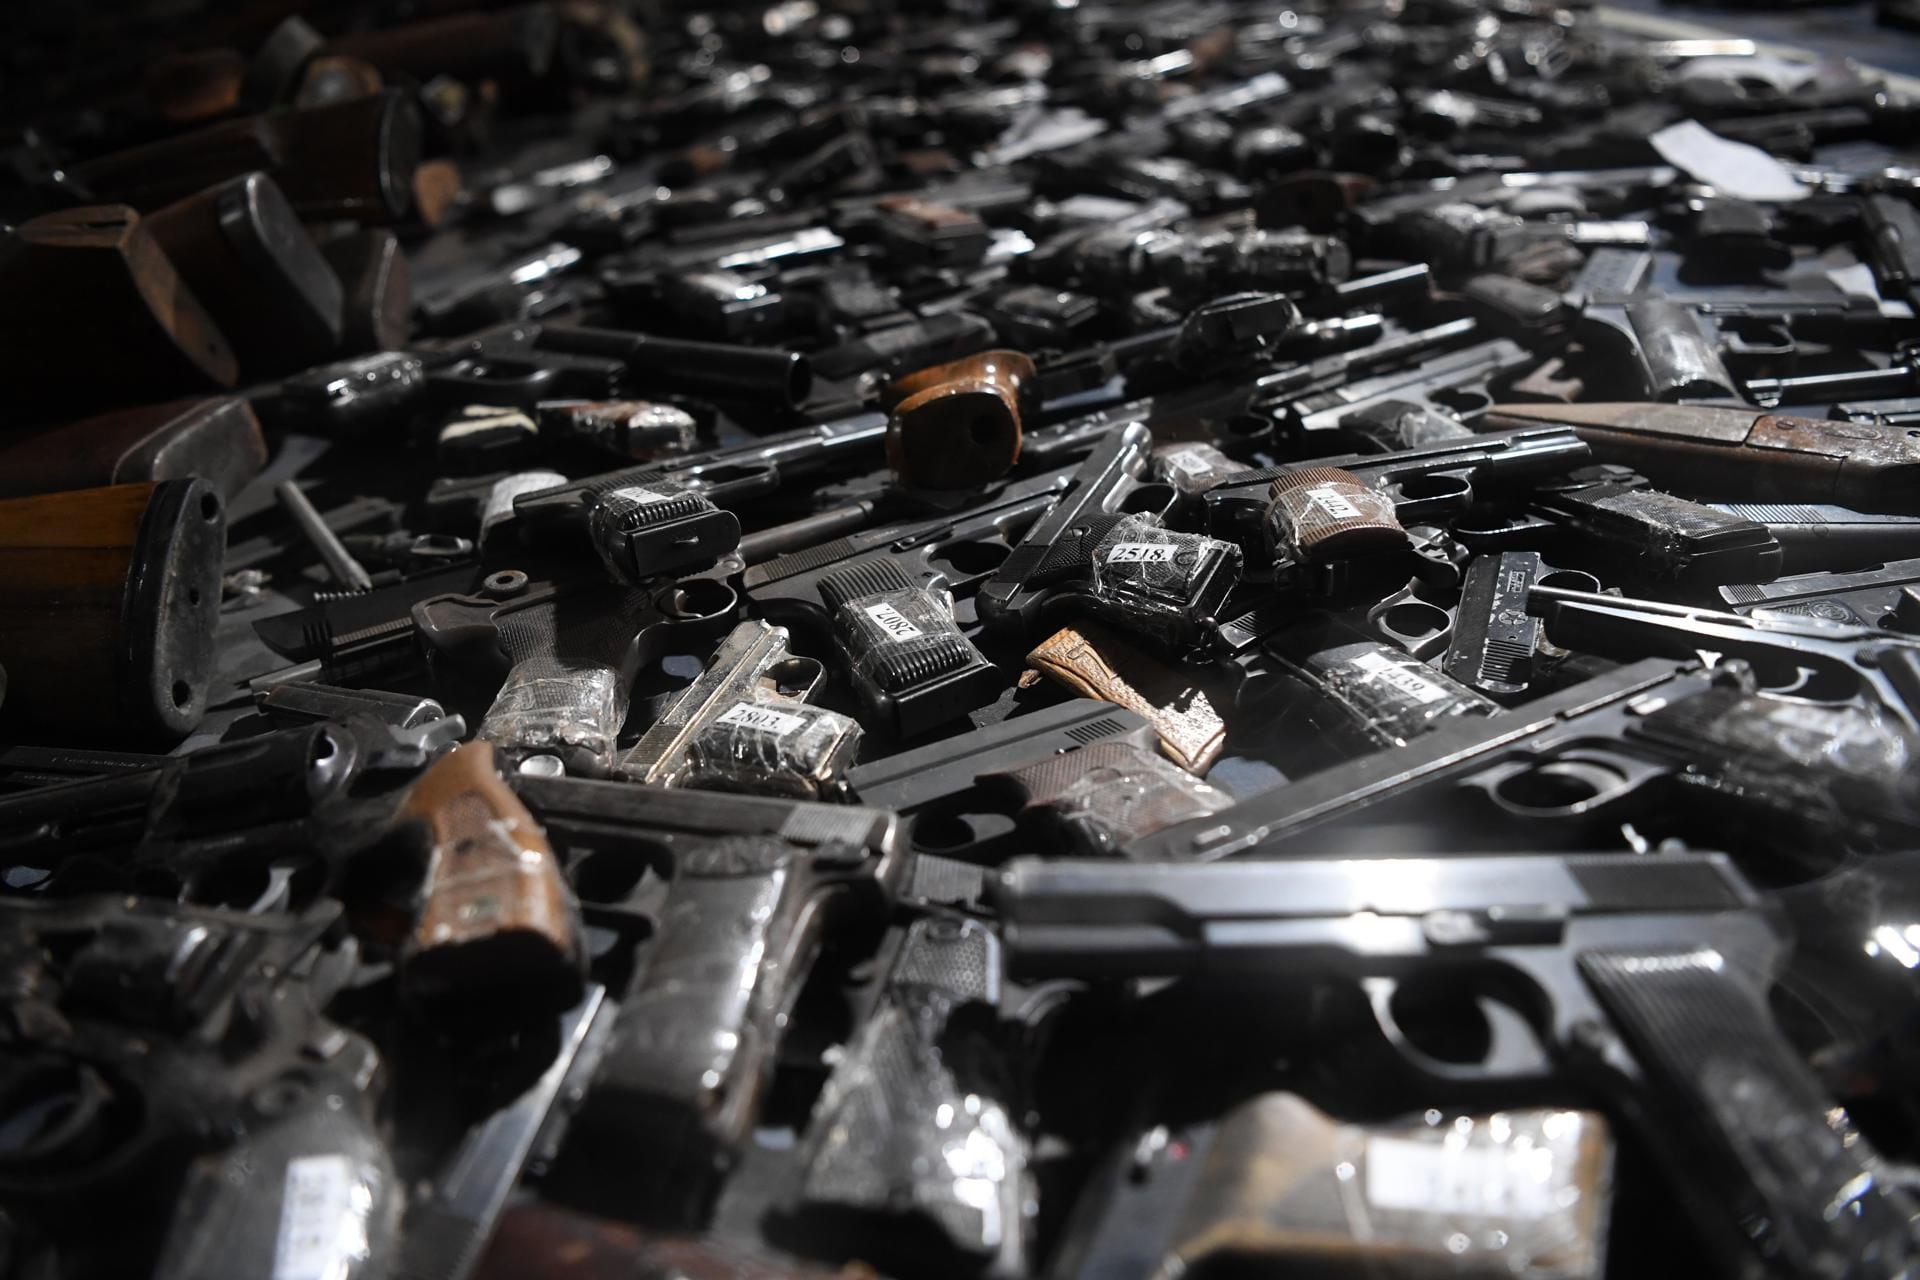 Smederevo (Serbia), 14/05/2023.- A handout photo made available by the Serbian Presidency shows unregistered handguns that were returned to police, near Smederevo, Serbia, 14 May 2023. More than 9,000 illegally-owned weapons and weapons parts have been handed over since 08 May 2023, after a mass gun amnesty was announced as part of a crackdown on firearm ownership in the wake of two deadly mass shootings in Serbia. A total of 17 people were killed in the attacks on 03 and 04 May 2023. (Atentado, Incendio) EFE/EPA/DIMITRIJE GOLL HANDOUT HANDOUT EDITORIAL USE ONLY/NO SALES
